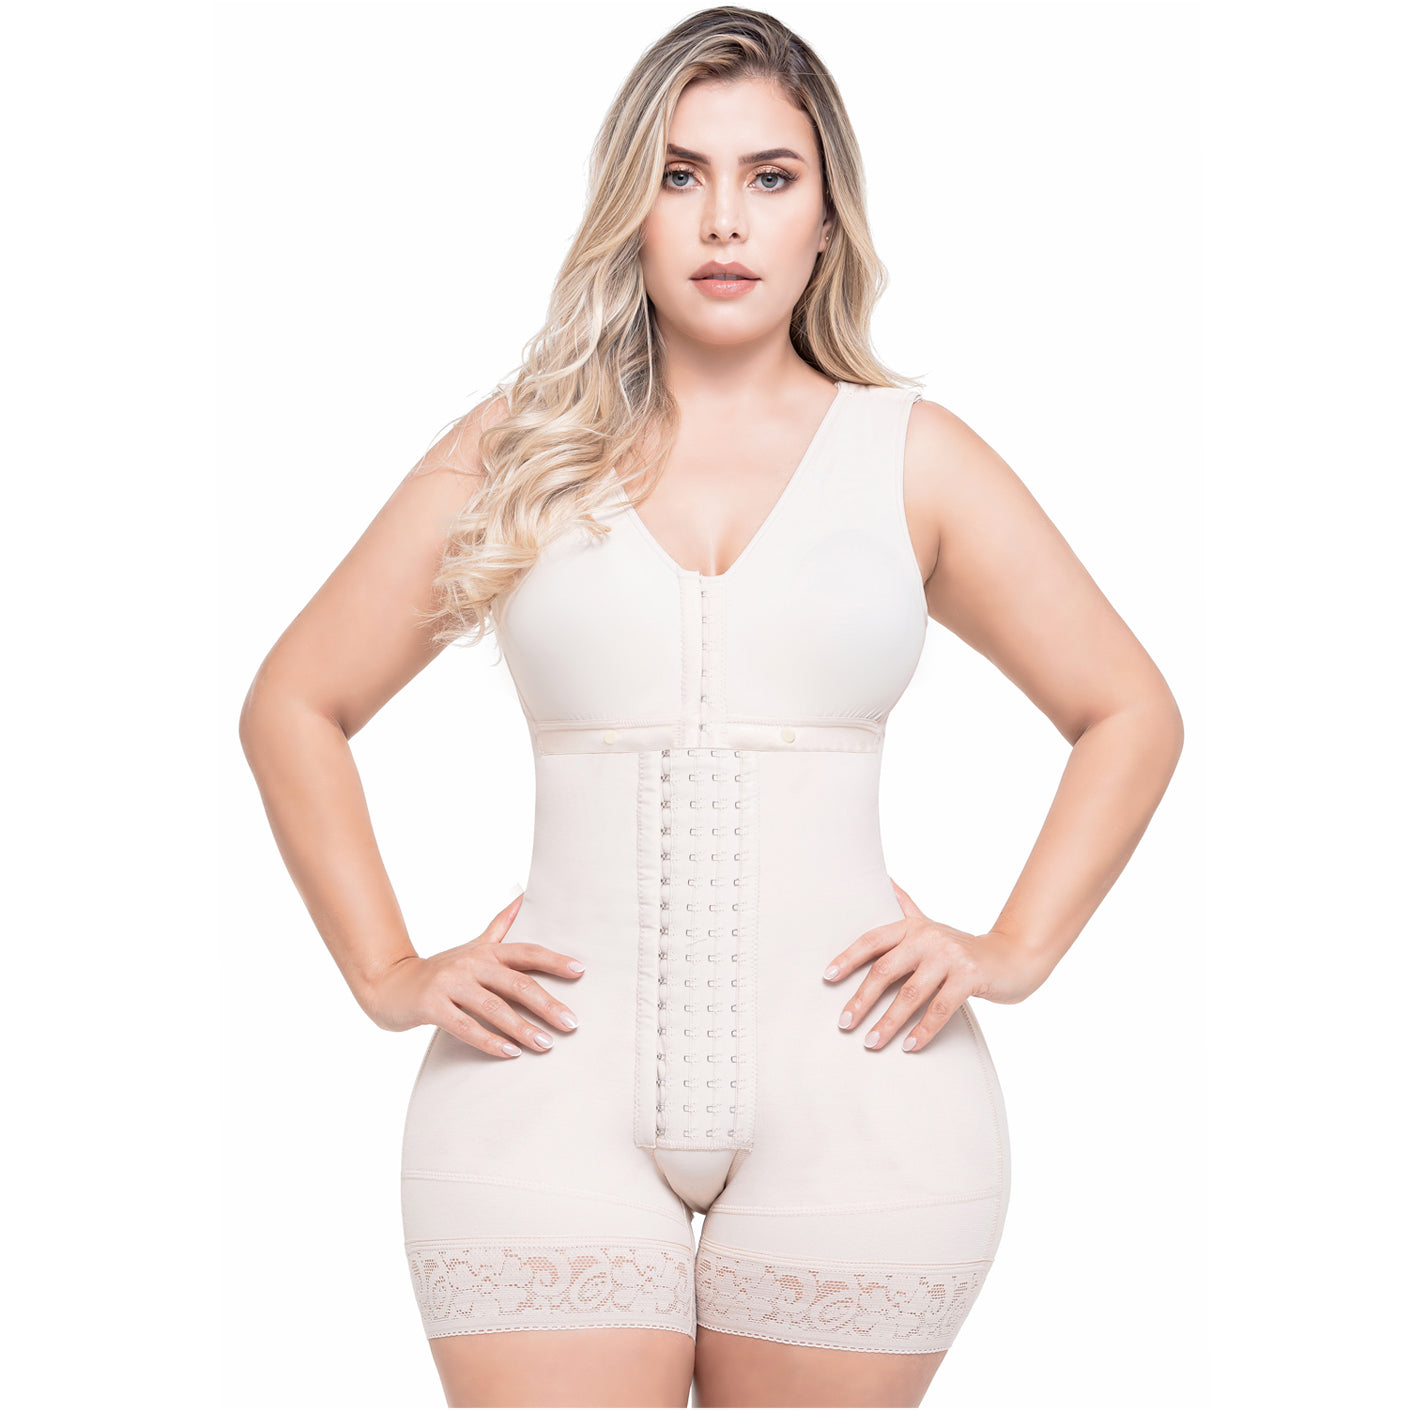 Premium Girdle for Women Fajas Colombianas Fresh and Light Fajas  Colombianas Reductoras y Moldeadoras Girdle for women Semaless Gusset  Opening with Hooks Anti-slip silicone band Strapless braless Wais 